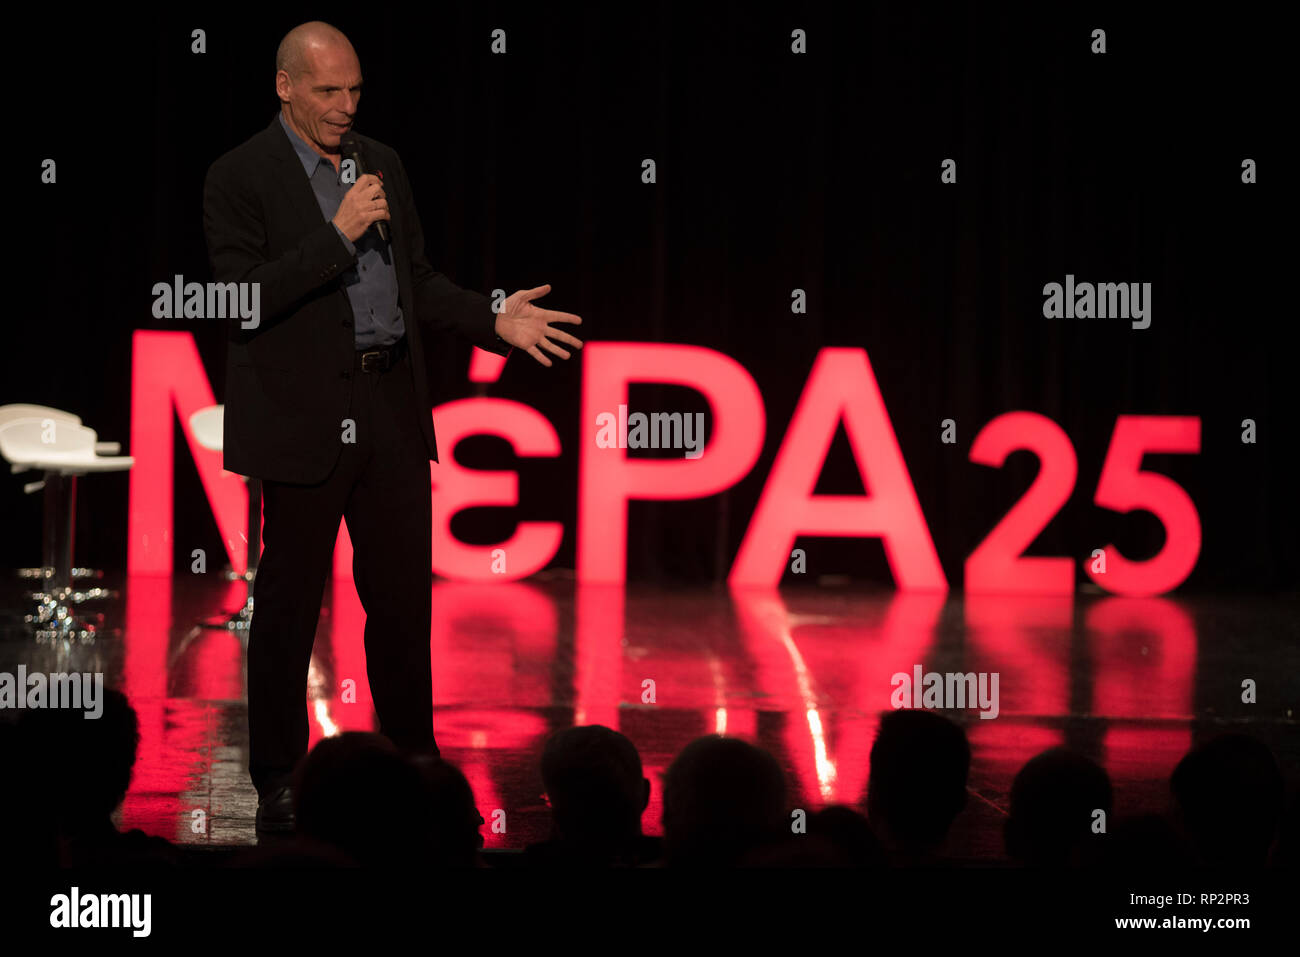 Athens, Greece. 20th Feb, 2019. YANIS VAROUFAKIS addresses MERA25 supporters. Former Greek Minister of Finance, co-founder of the Democracy in Europe Movement 2025 (DiEM25), secretary of it’s greek branch MERA25 and MEP candidate, Yanis Varoufakis, staged an event to present the candidates who will run with MERA25(European Realistic Disobedience Front) in the 2019 European Parliament elections.© Nikolas Georgiou / Alamy Live News Credit: Nikolas Georgiou/Alamy Live News Stock Photo